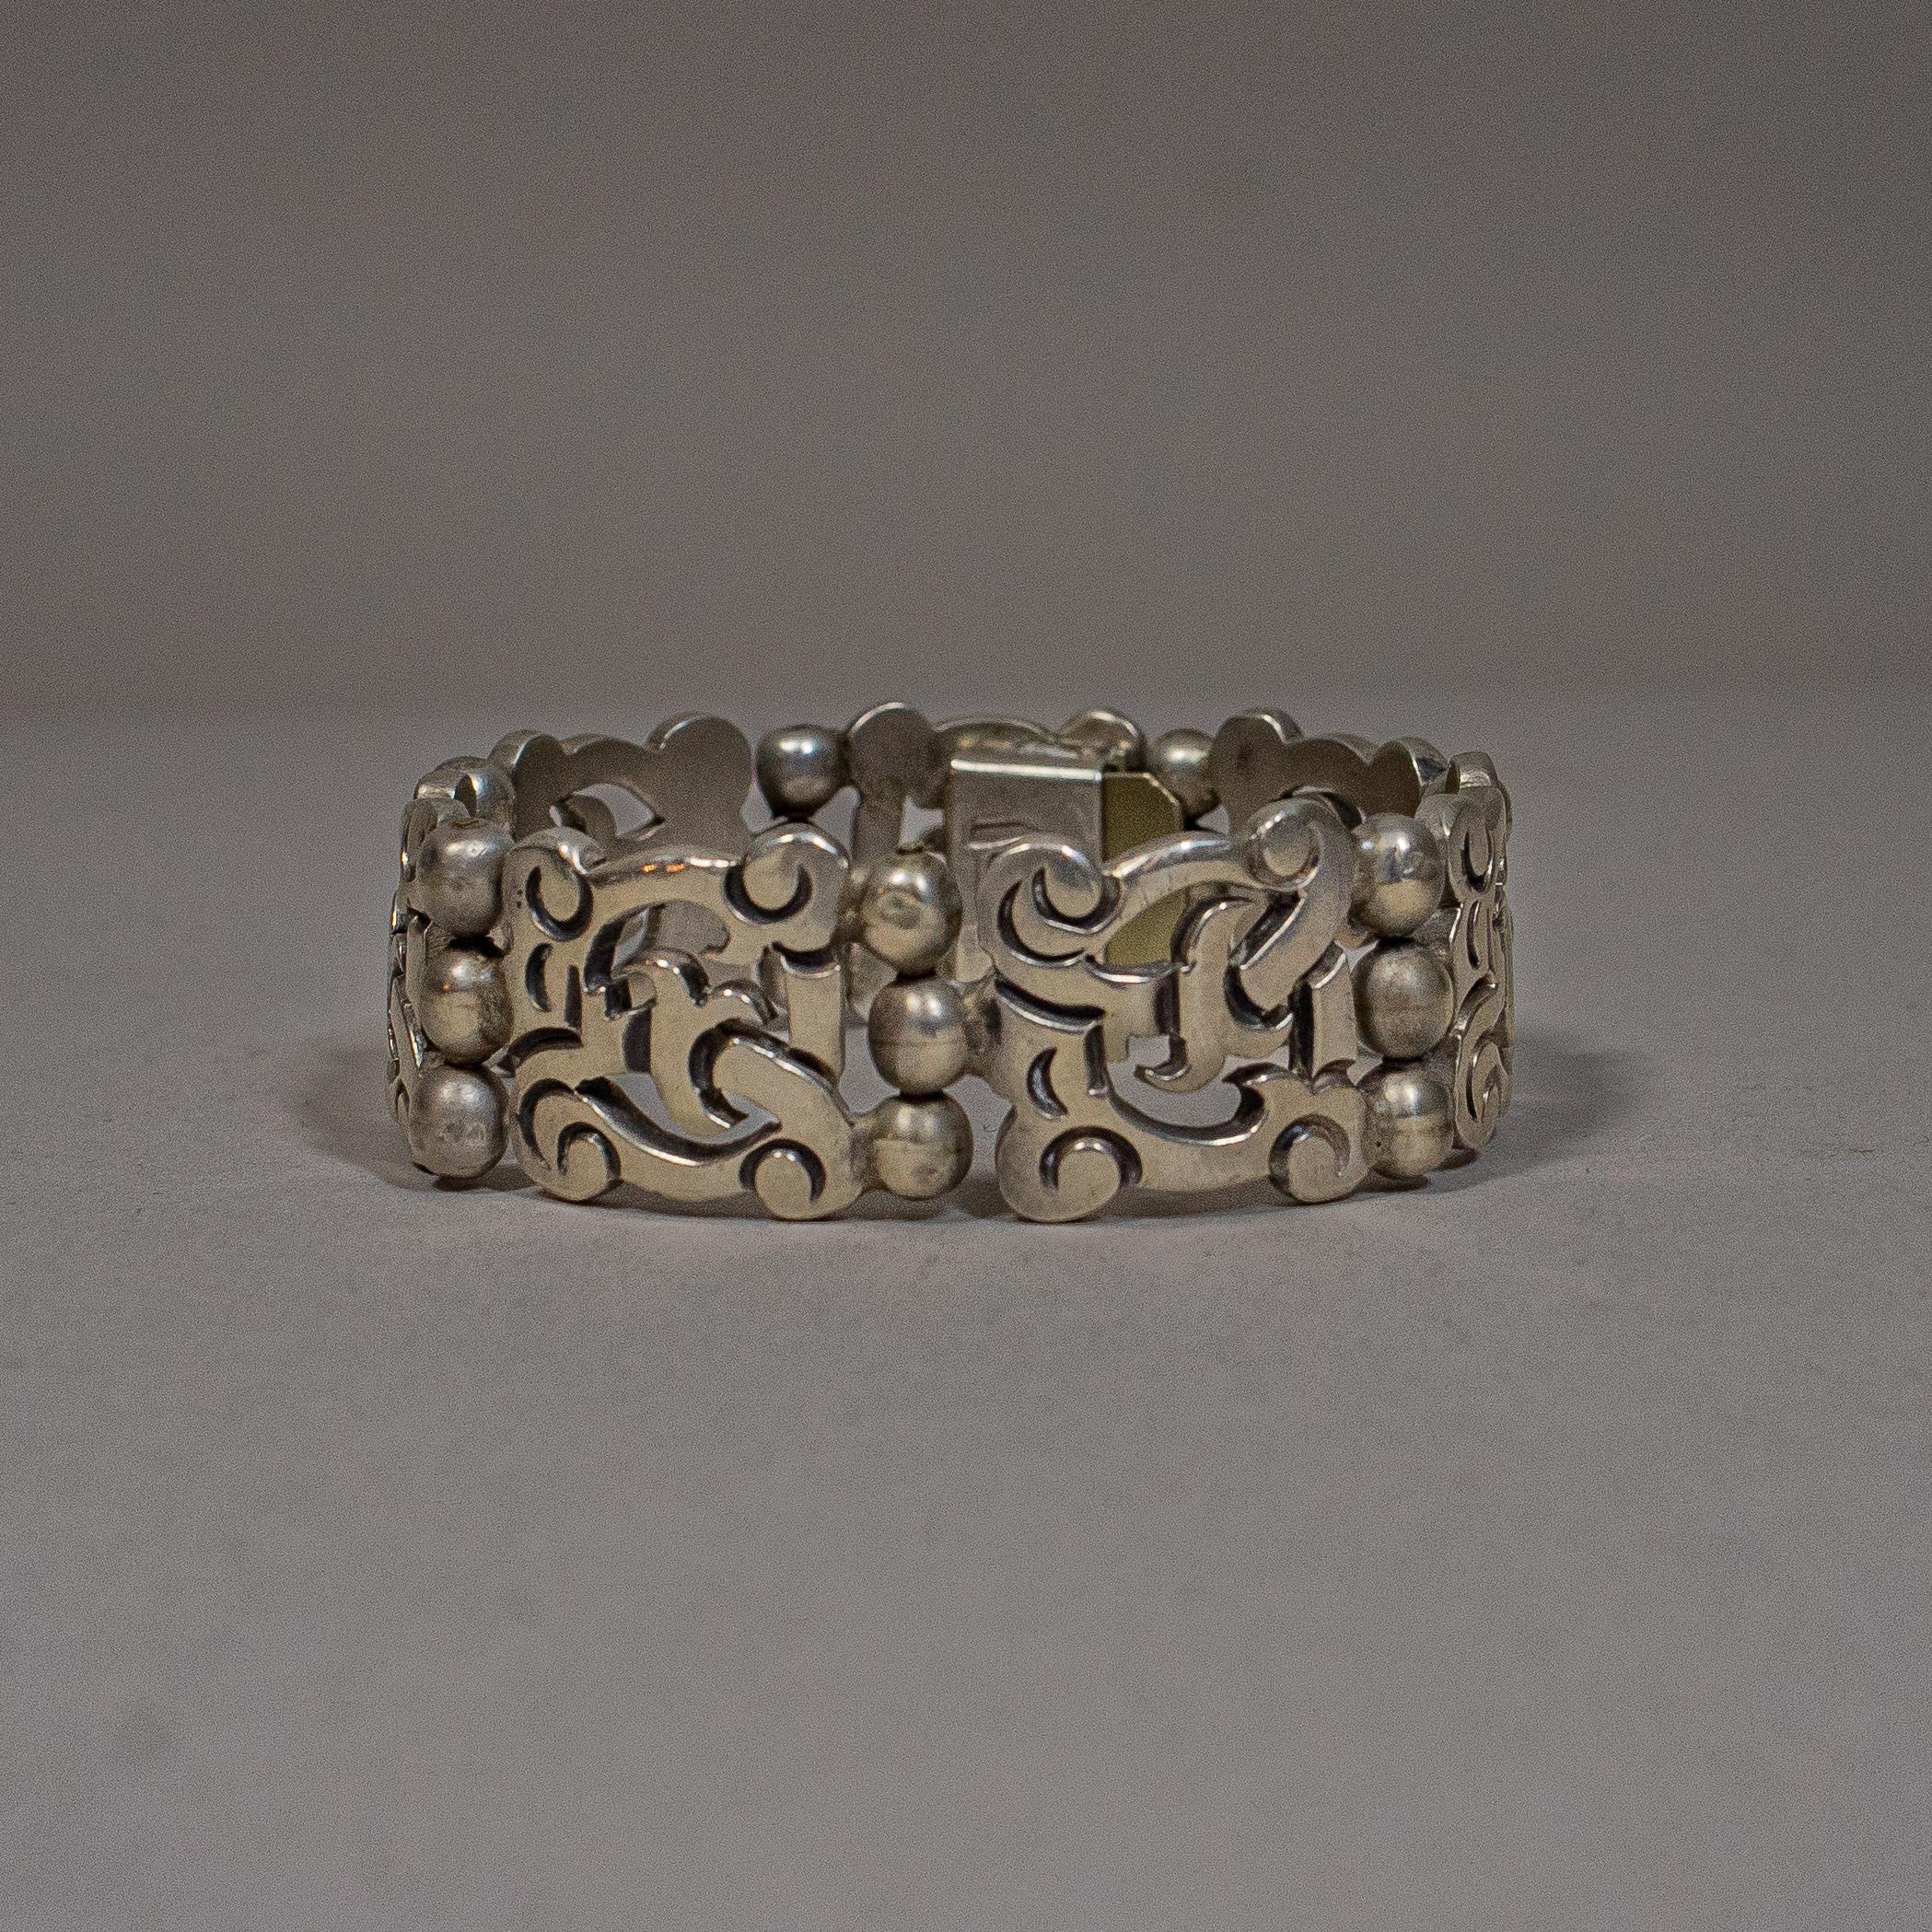 A 1940s Mexican Mid-Century Modern silver bracelet by American designer Frederick 